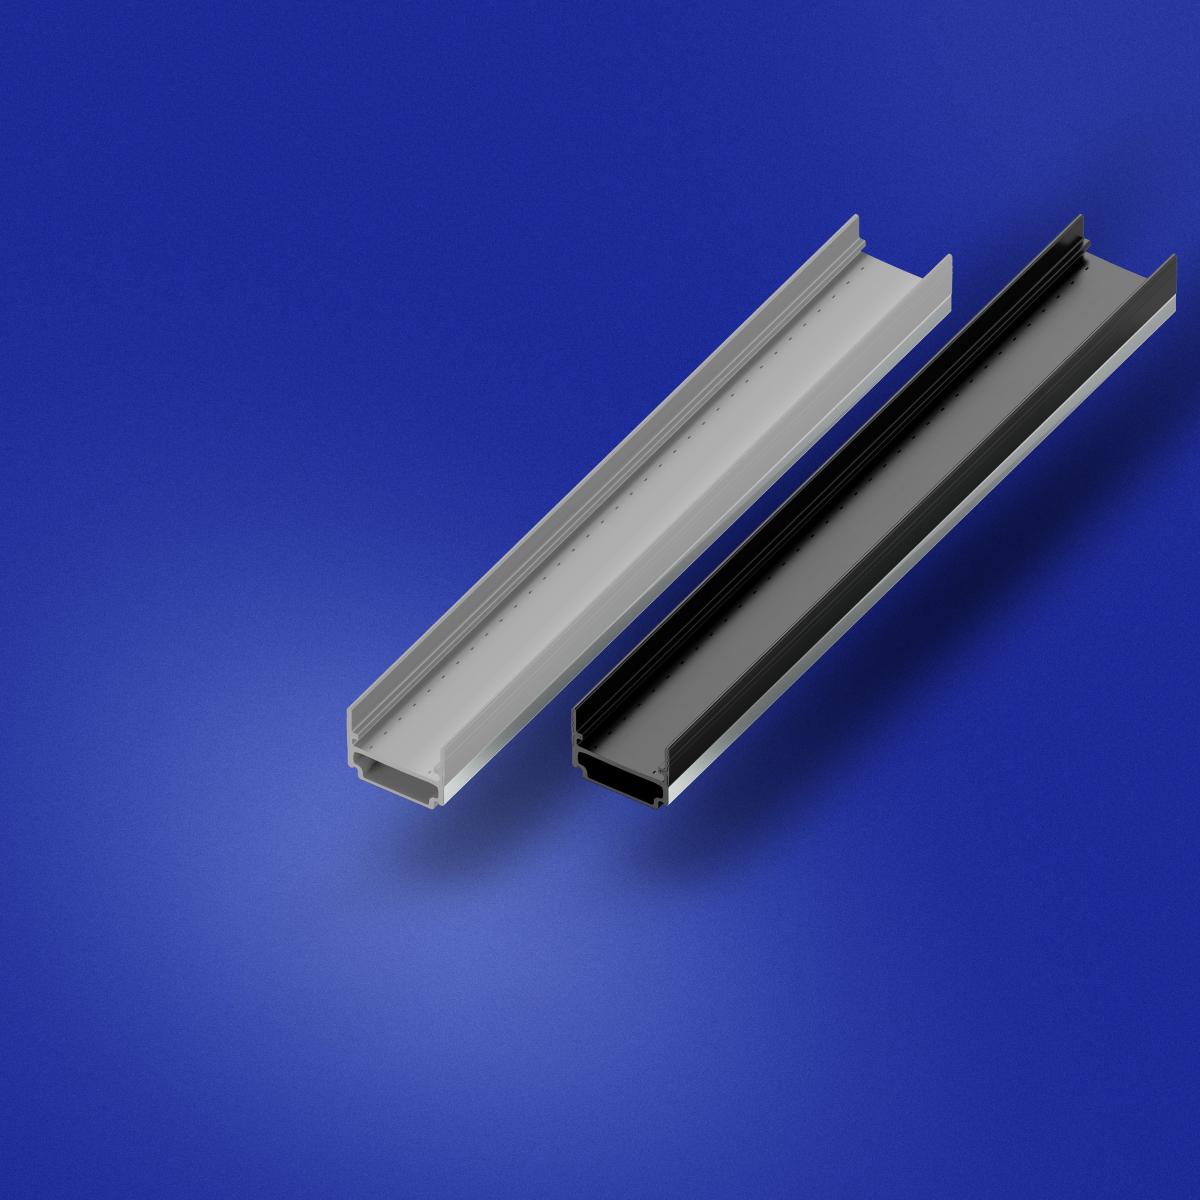 Spacers for integrated blinds